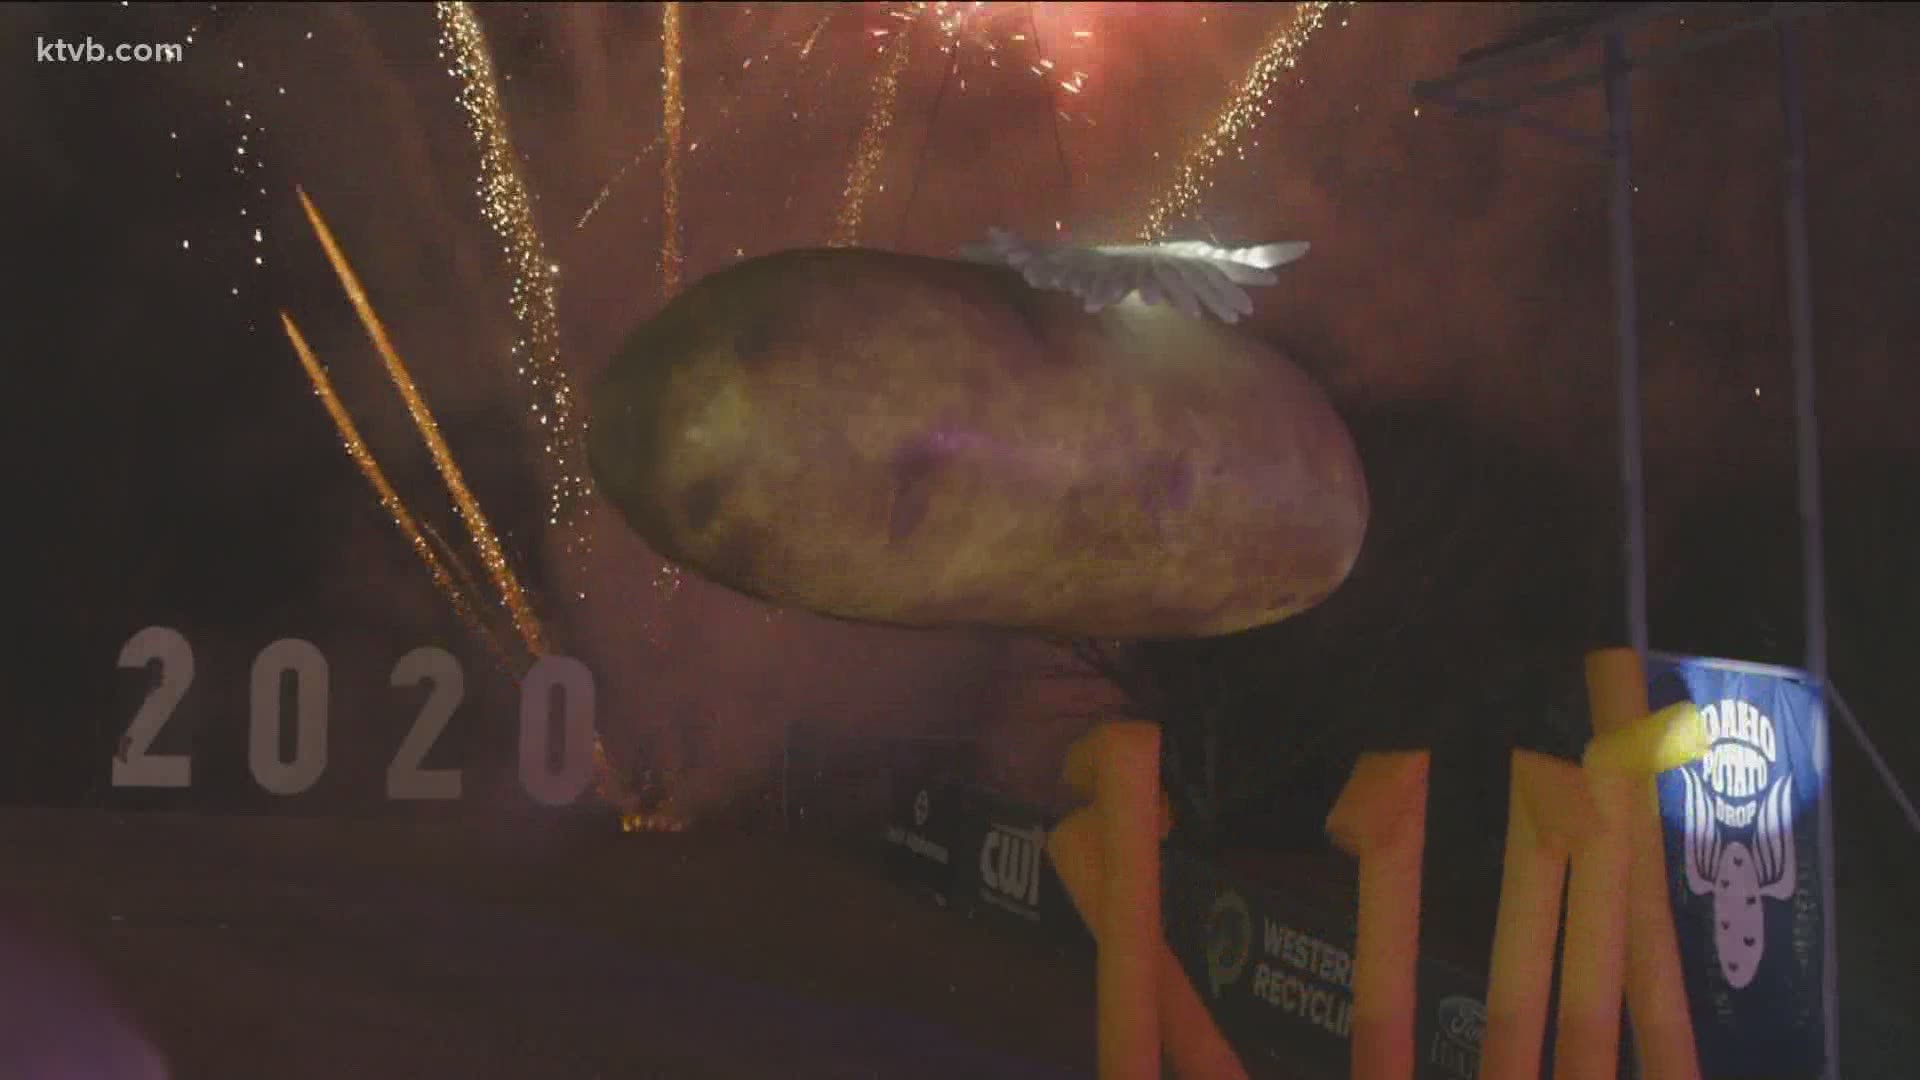 Idahoans said goodbye to 2020 and rang in the new year by dropping a giant spud at the stroke of midnight.